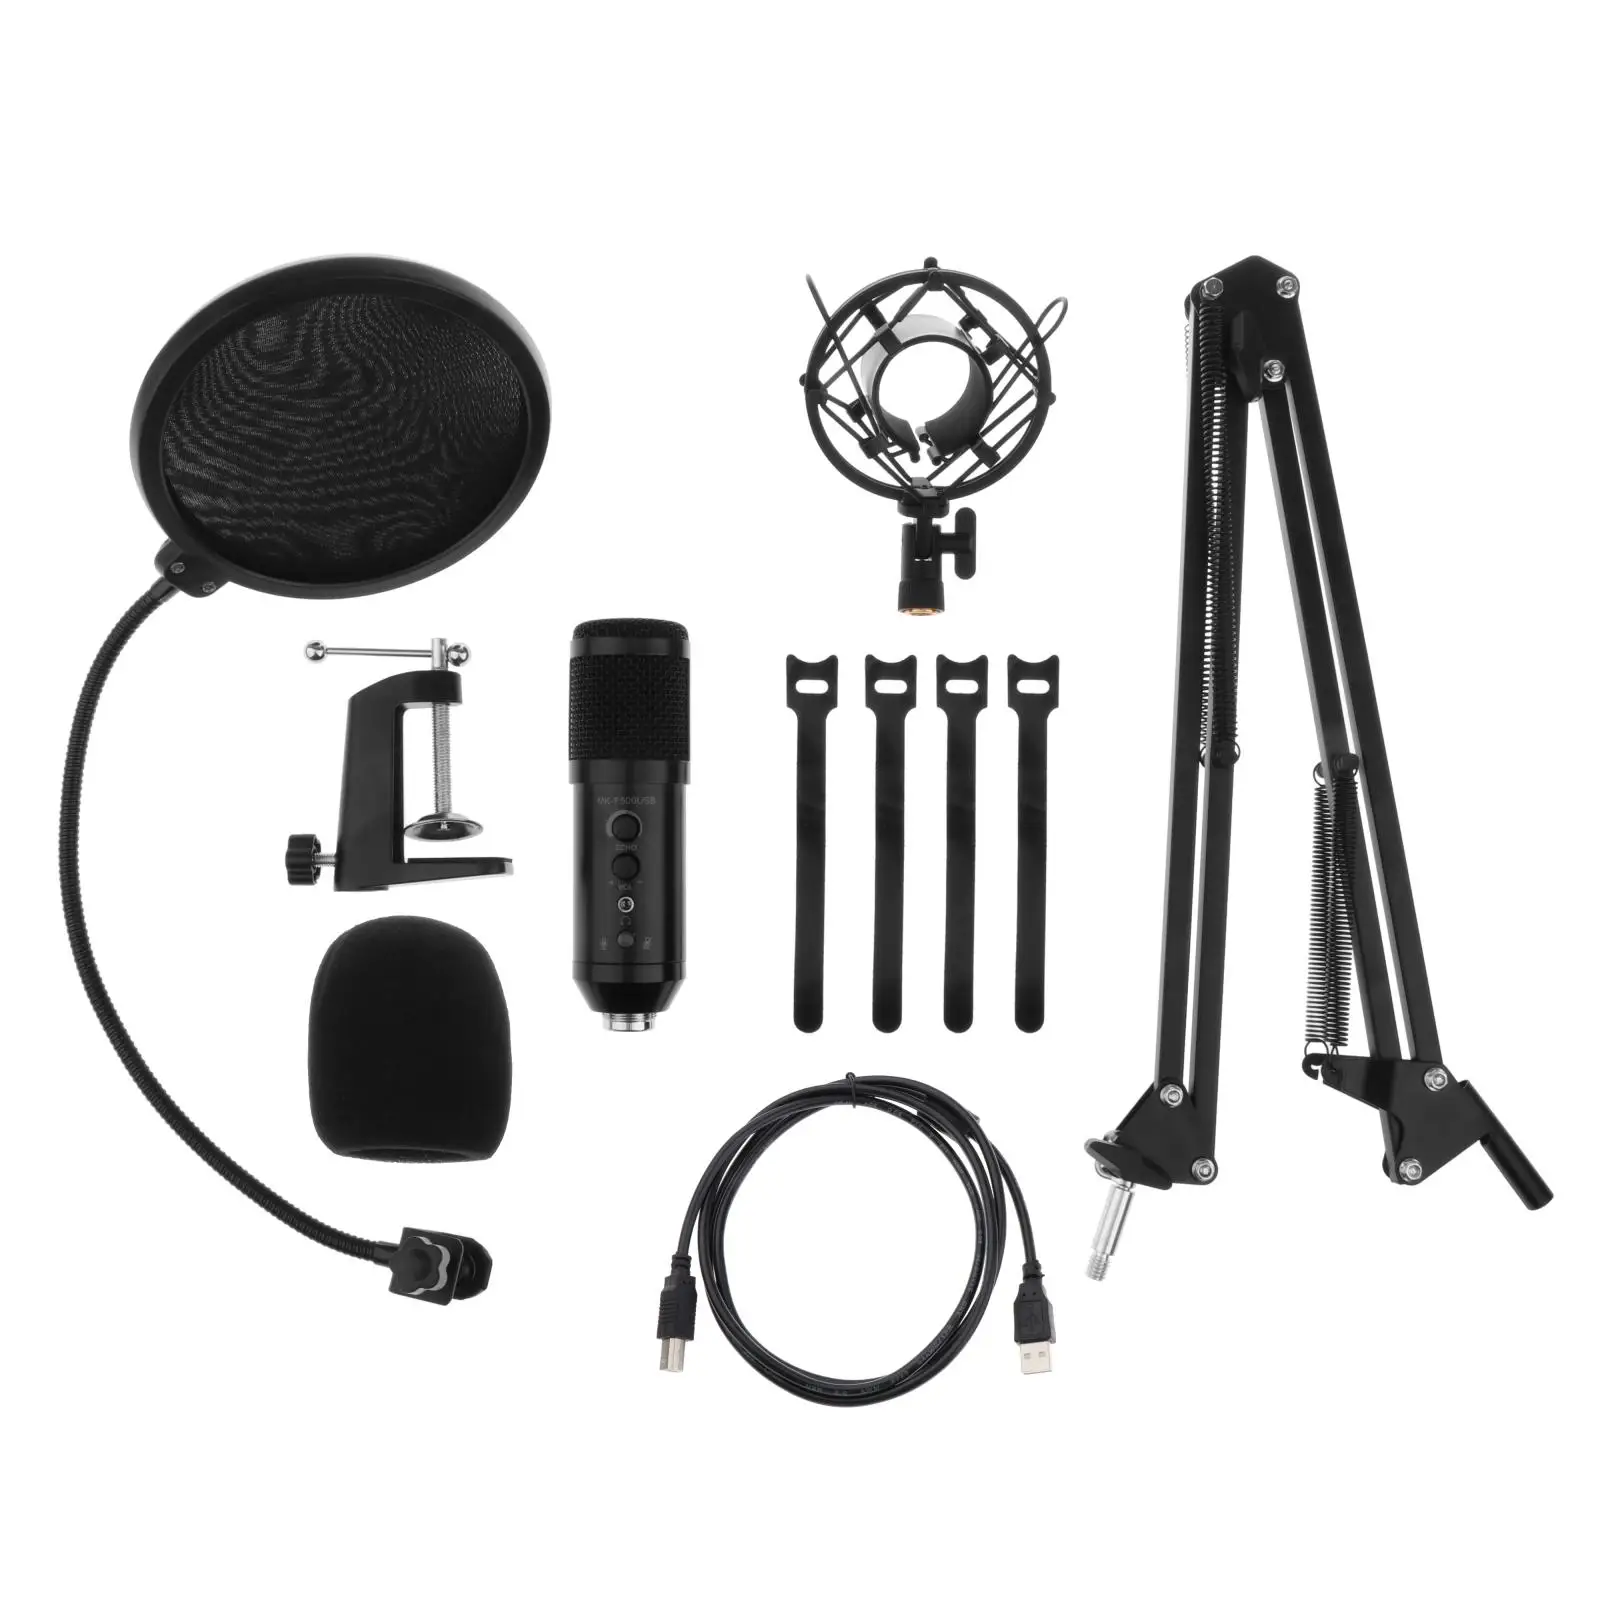 

Condenser Microphone Set w/ USB Audio Adapter Professional Cardioid Vocal Studio Recording Mic for Streaming Voice Over